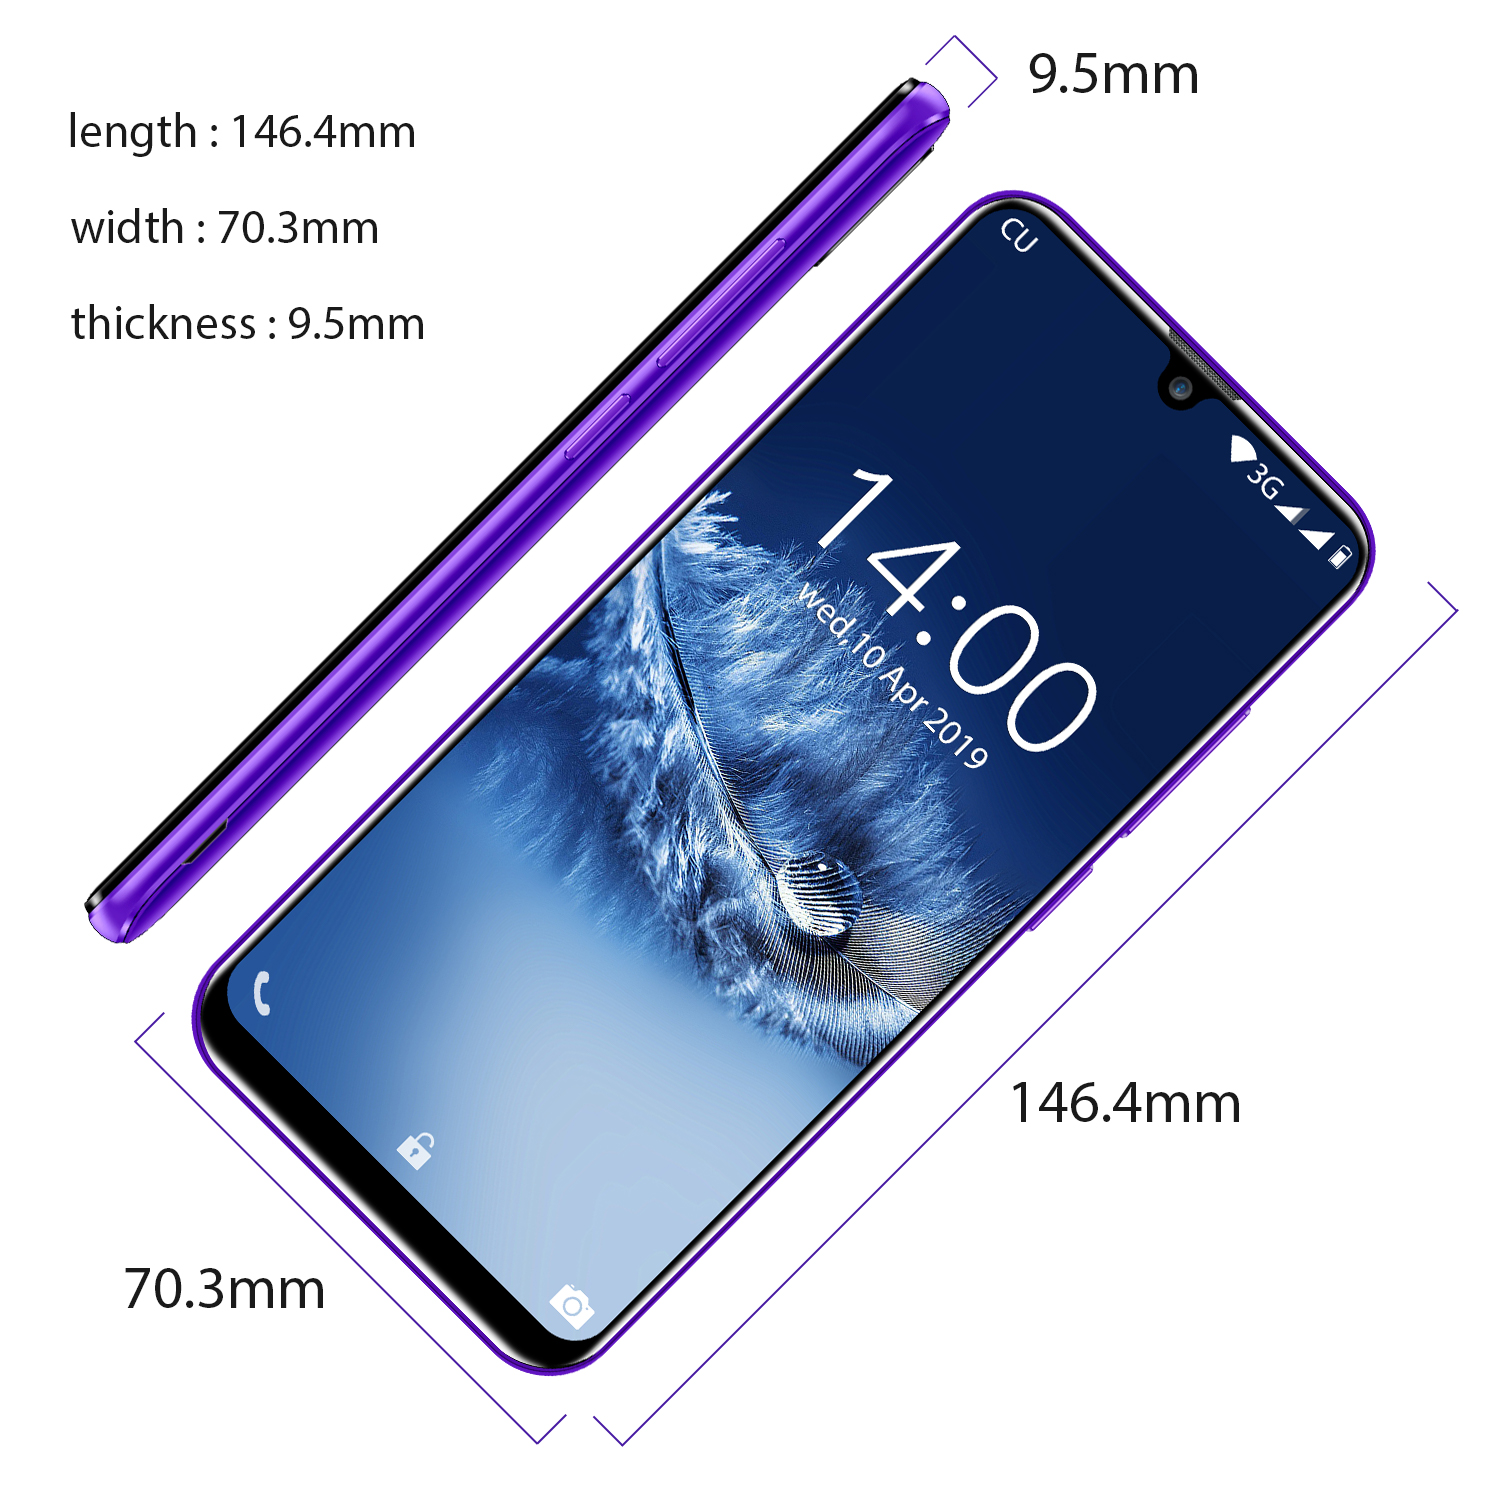 Oukitel C16 " Mobile phone 2+16 GB Android 9.0 support 5G/2.4G wifi with Face ID